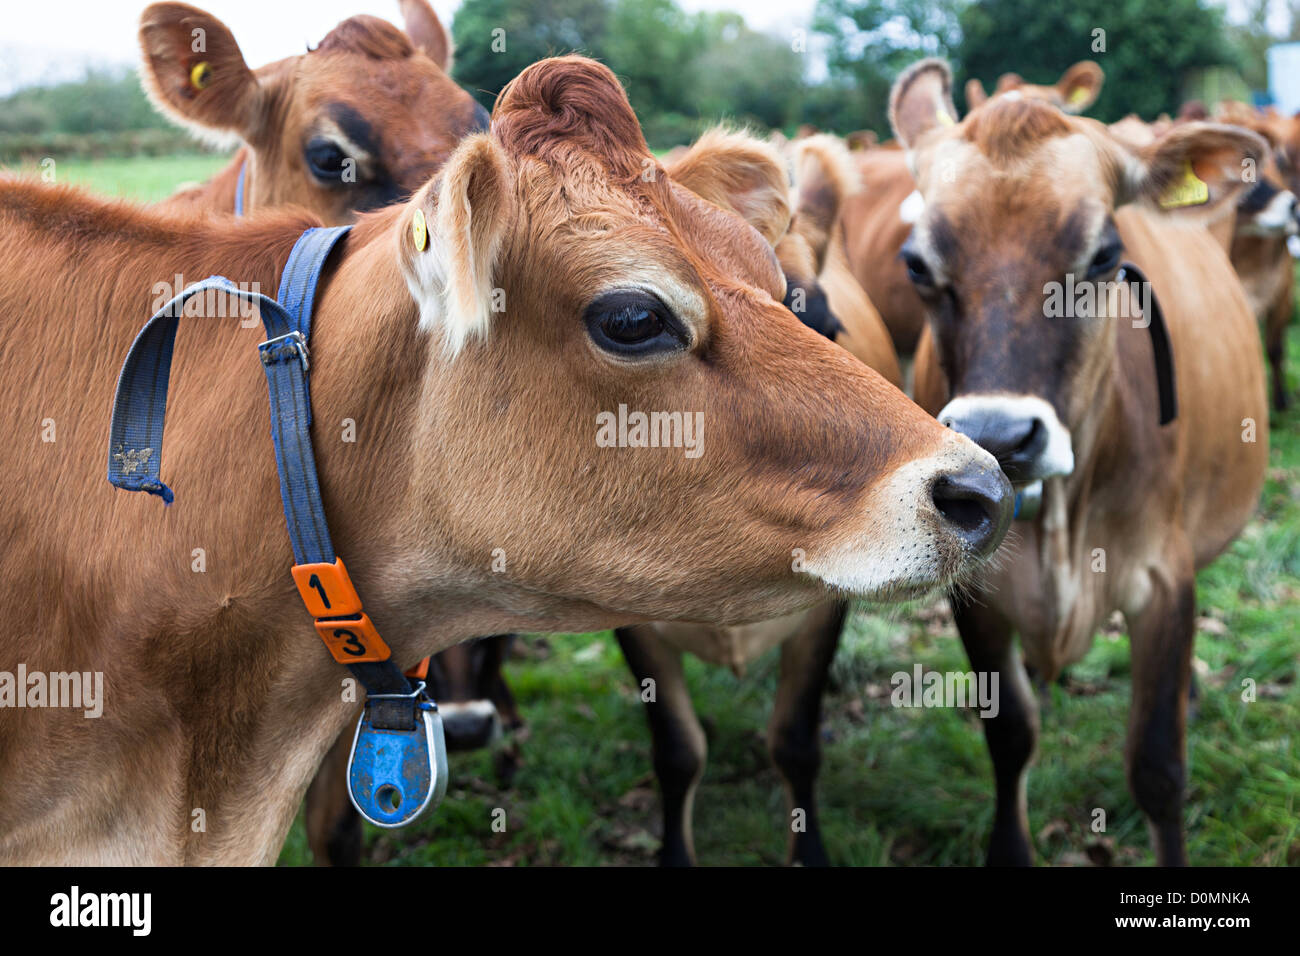 Herd of Jersey cows with collar and number, Jersey, Channel Islands, UK Stock Photo